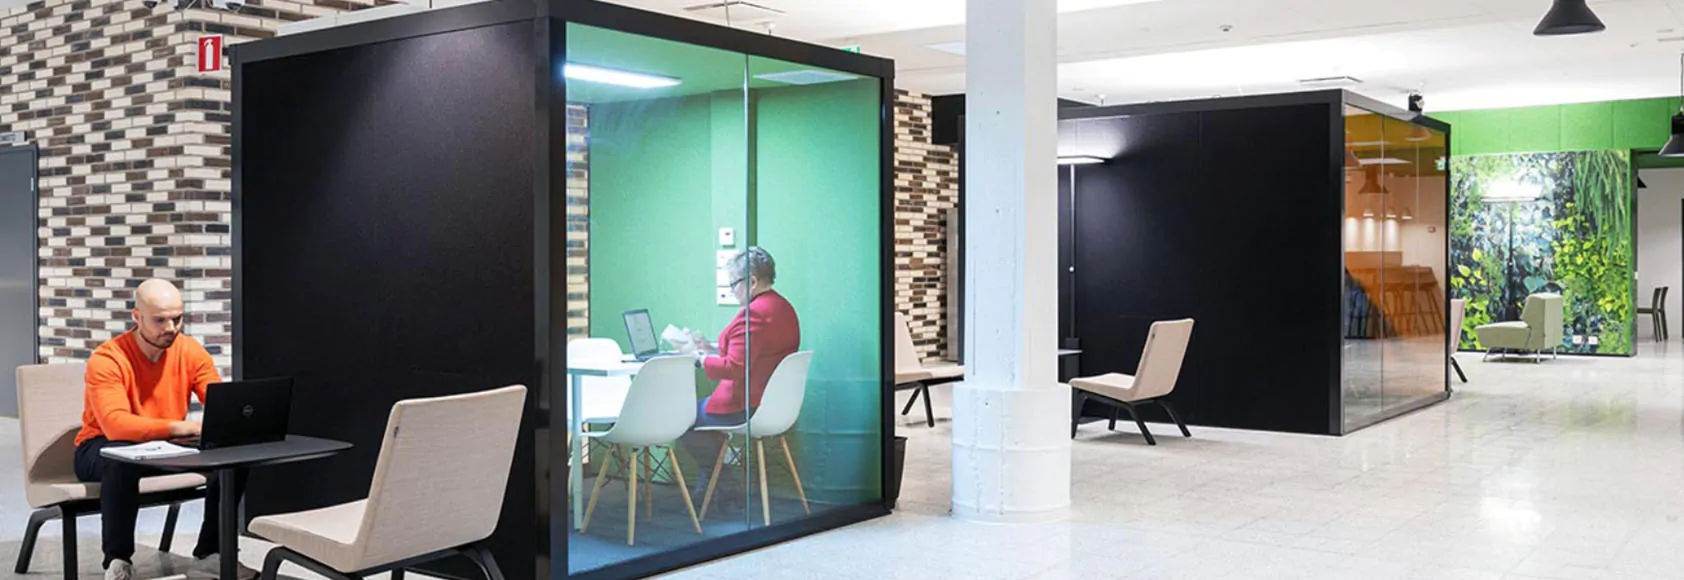 Acoustic pods to create safer and more productive spaces